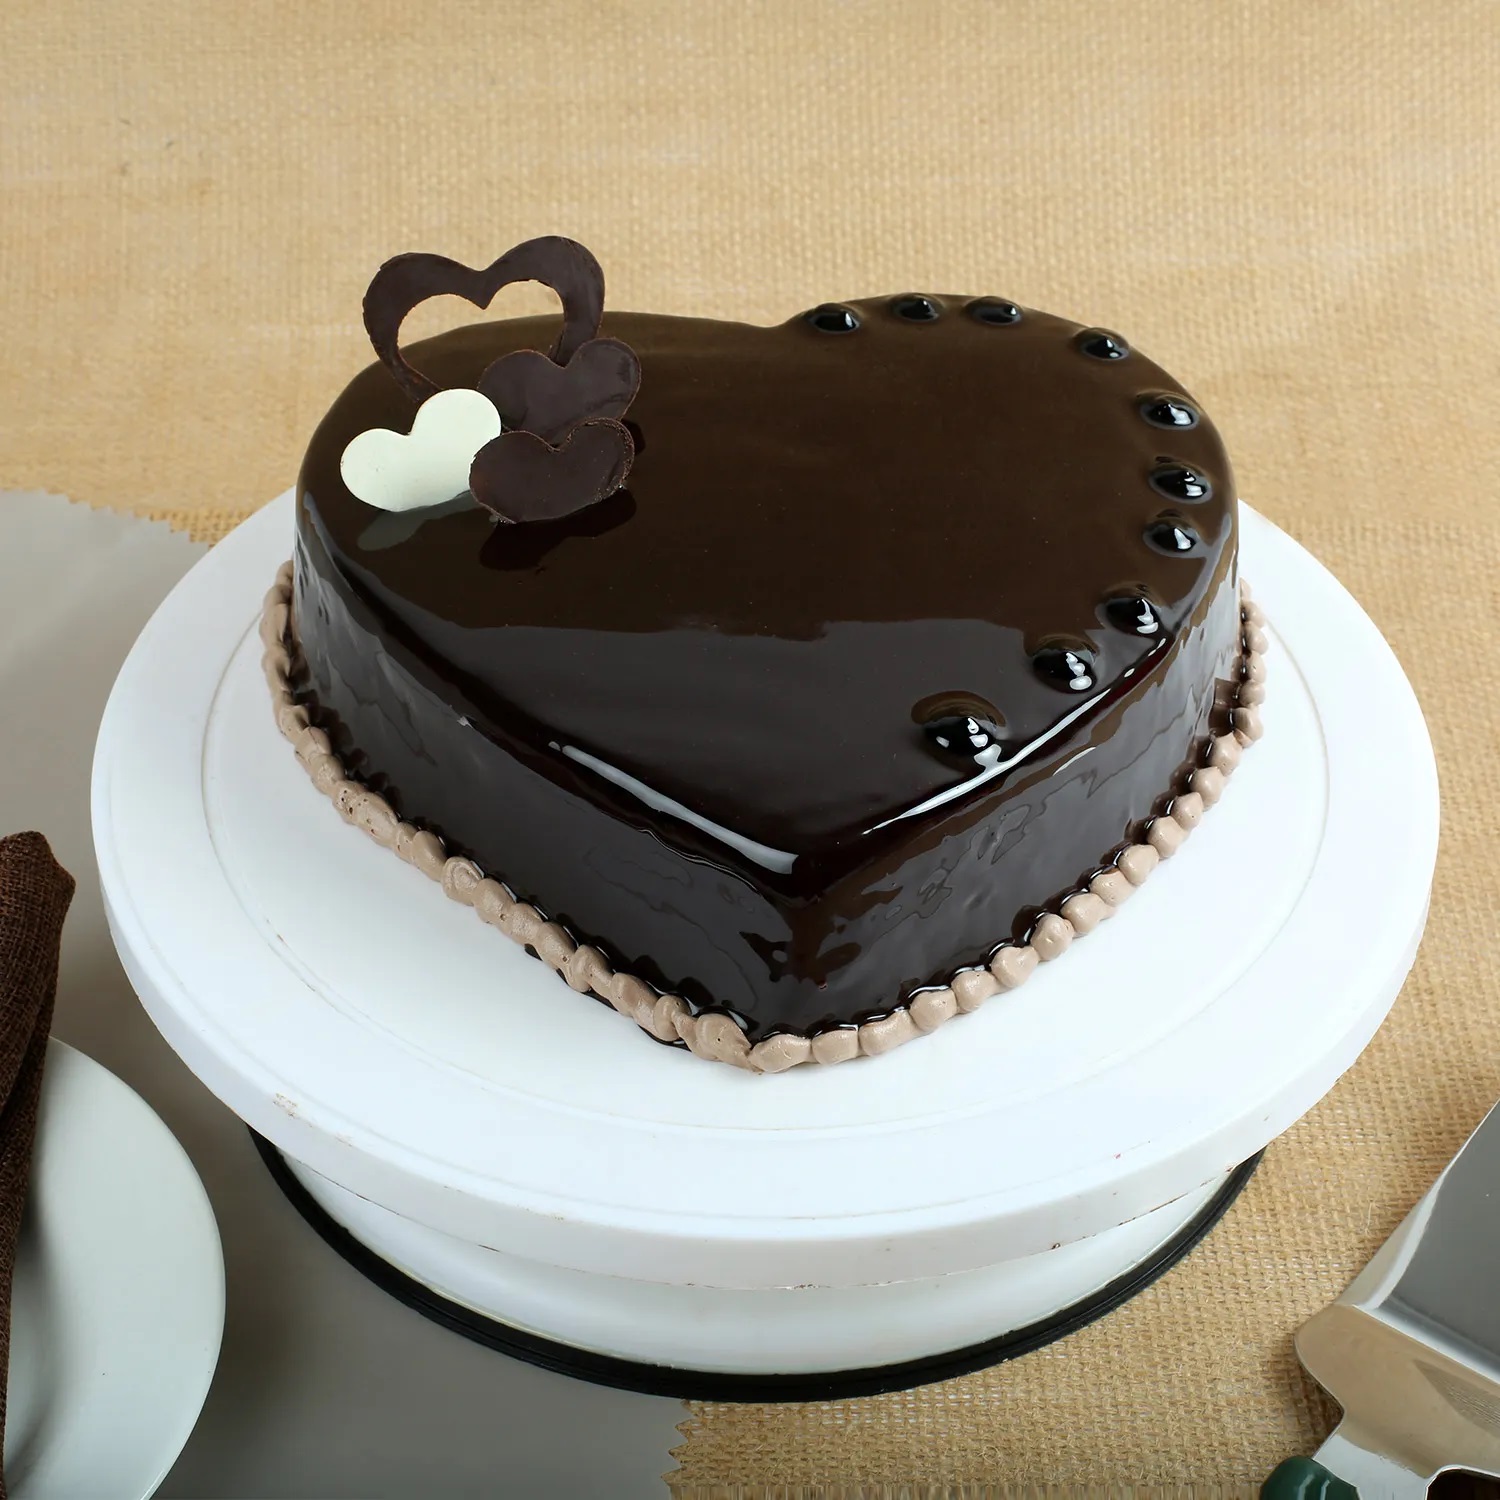 Cookies Monster Cake, 24x7 Home delivery of Cake in Gurgaon Sector-37 Part  2, Gurgaon